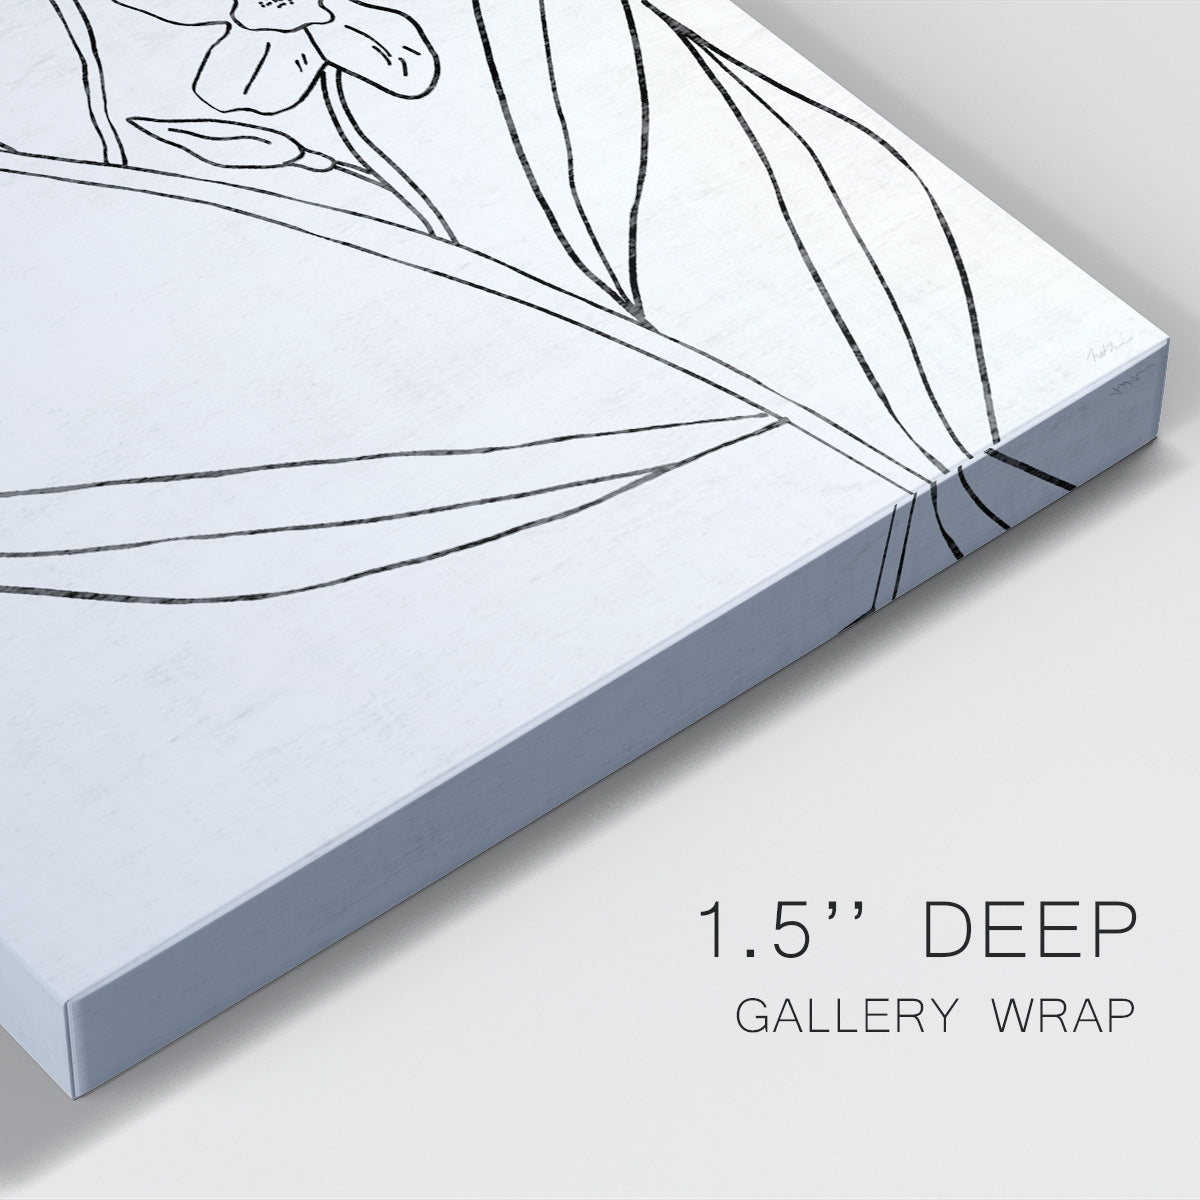 Botanical Sketch II Premium Gallery Wrapped Canvas - Ready to Hang